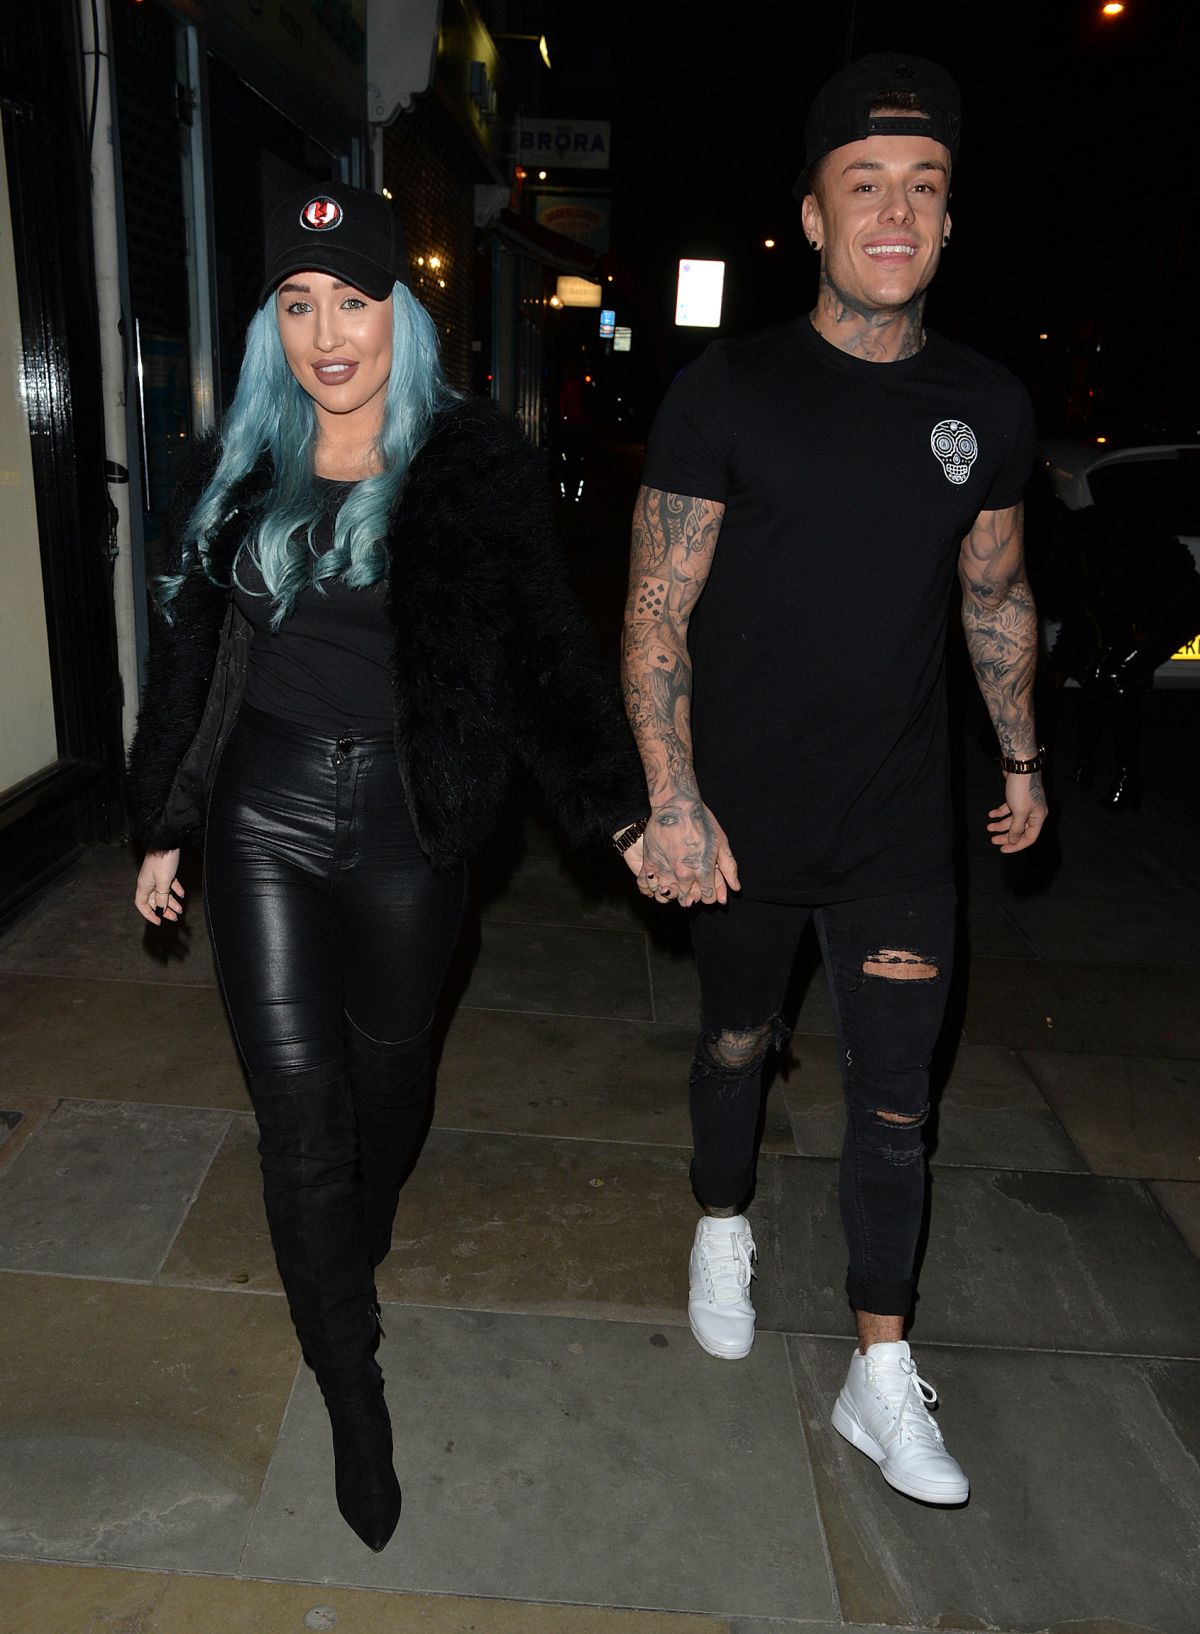 Helen Briggs leaving Jake Sims’ Record Launch